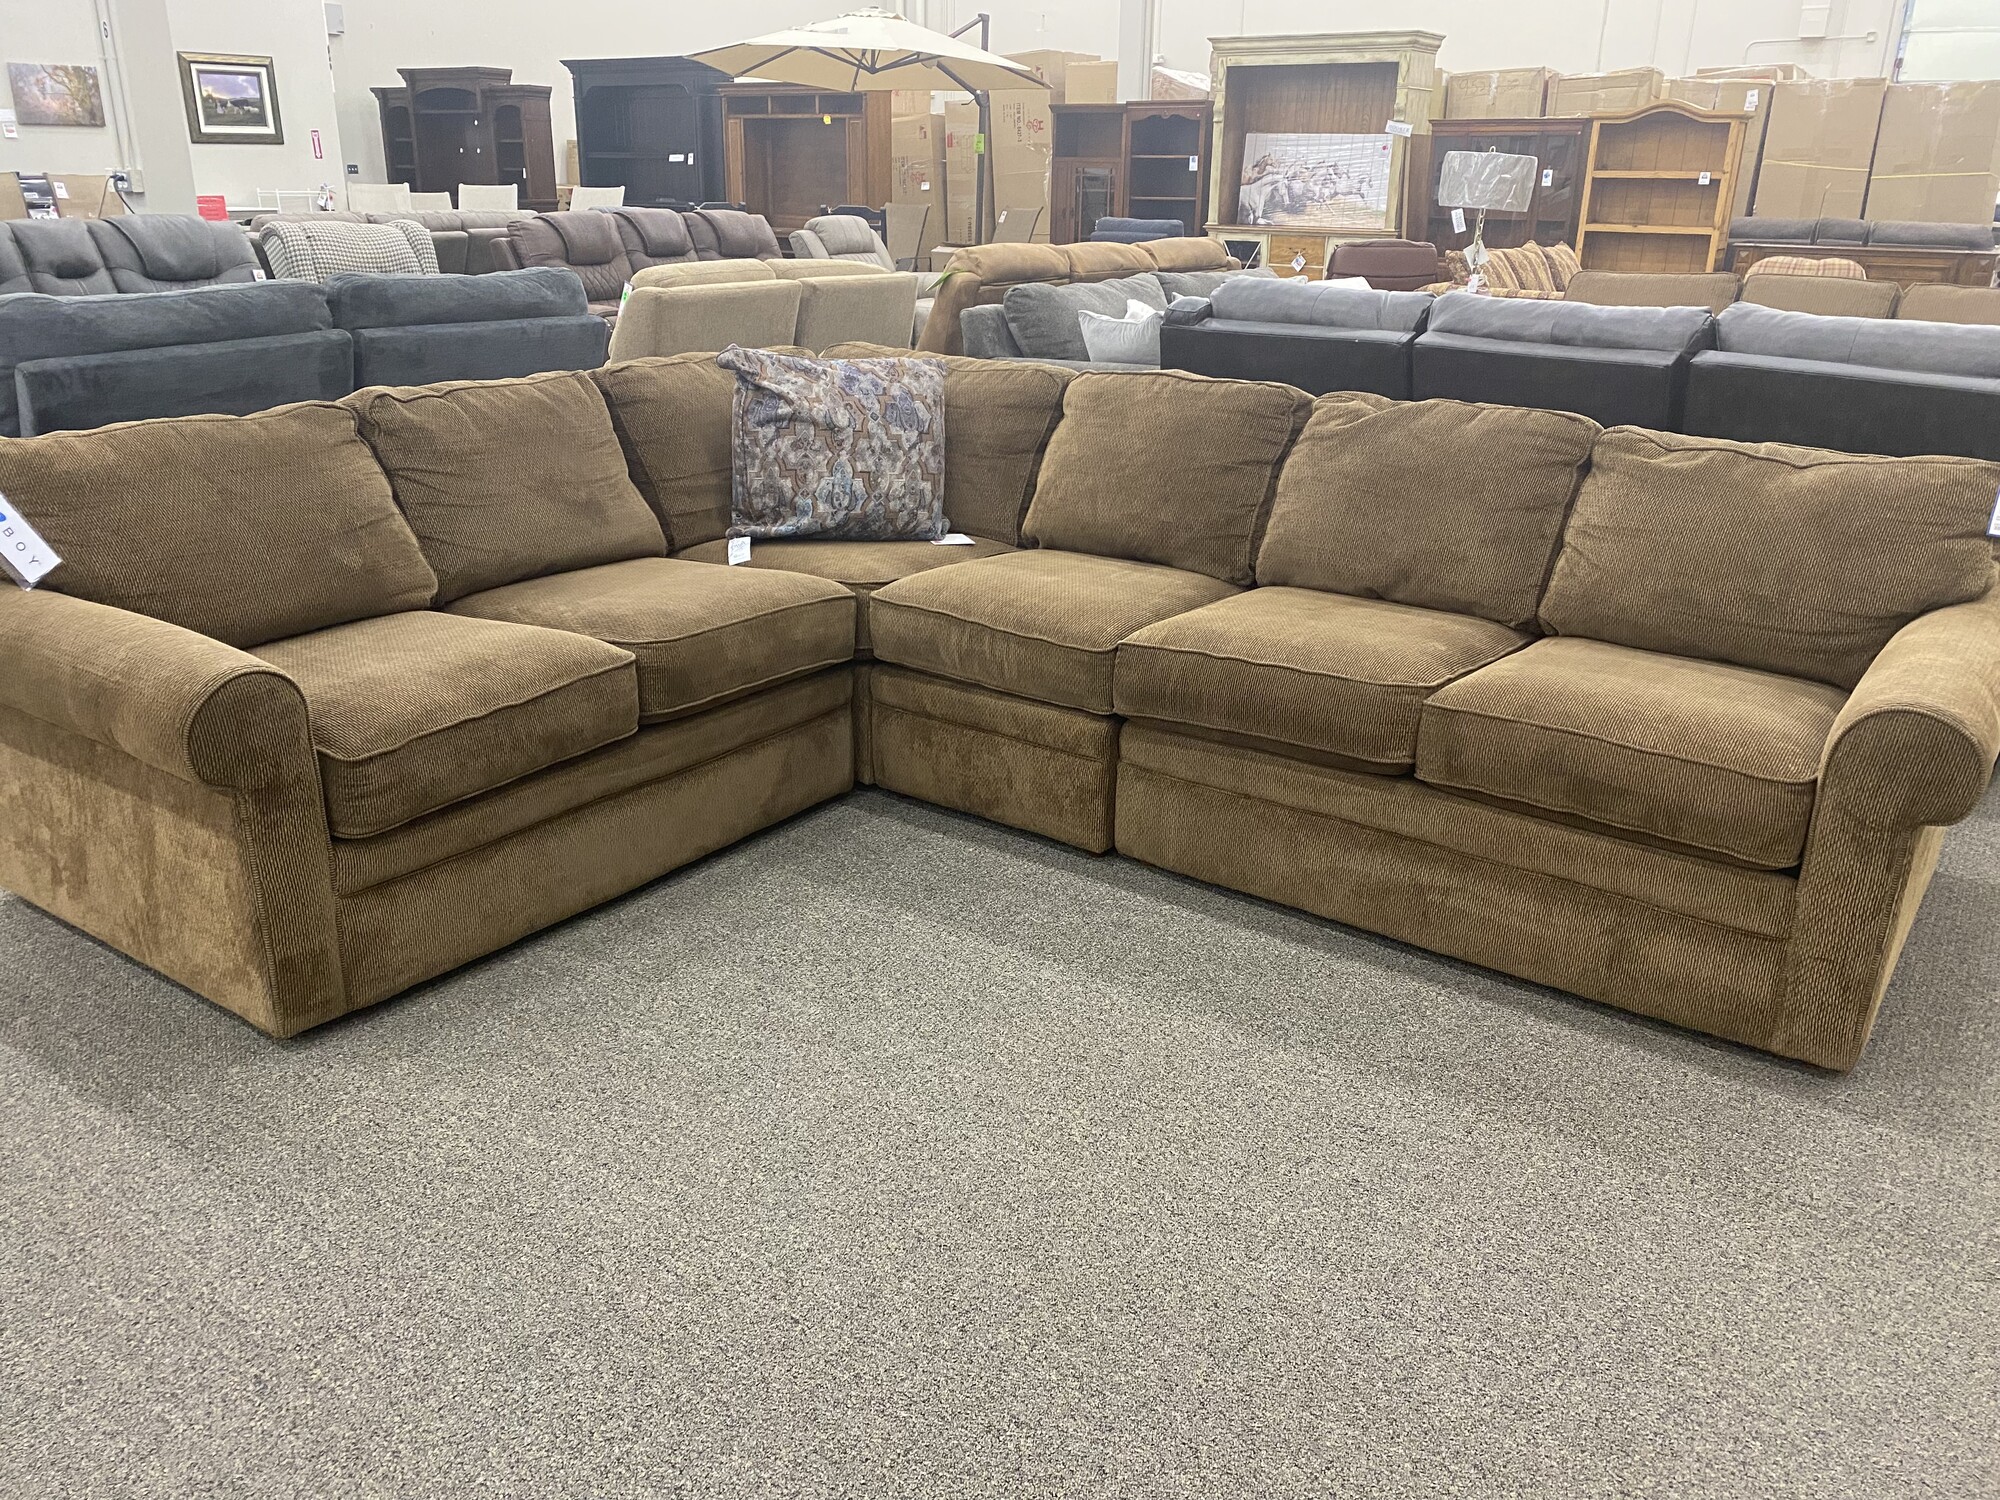 Worn LaZboy 4pc. Sectional